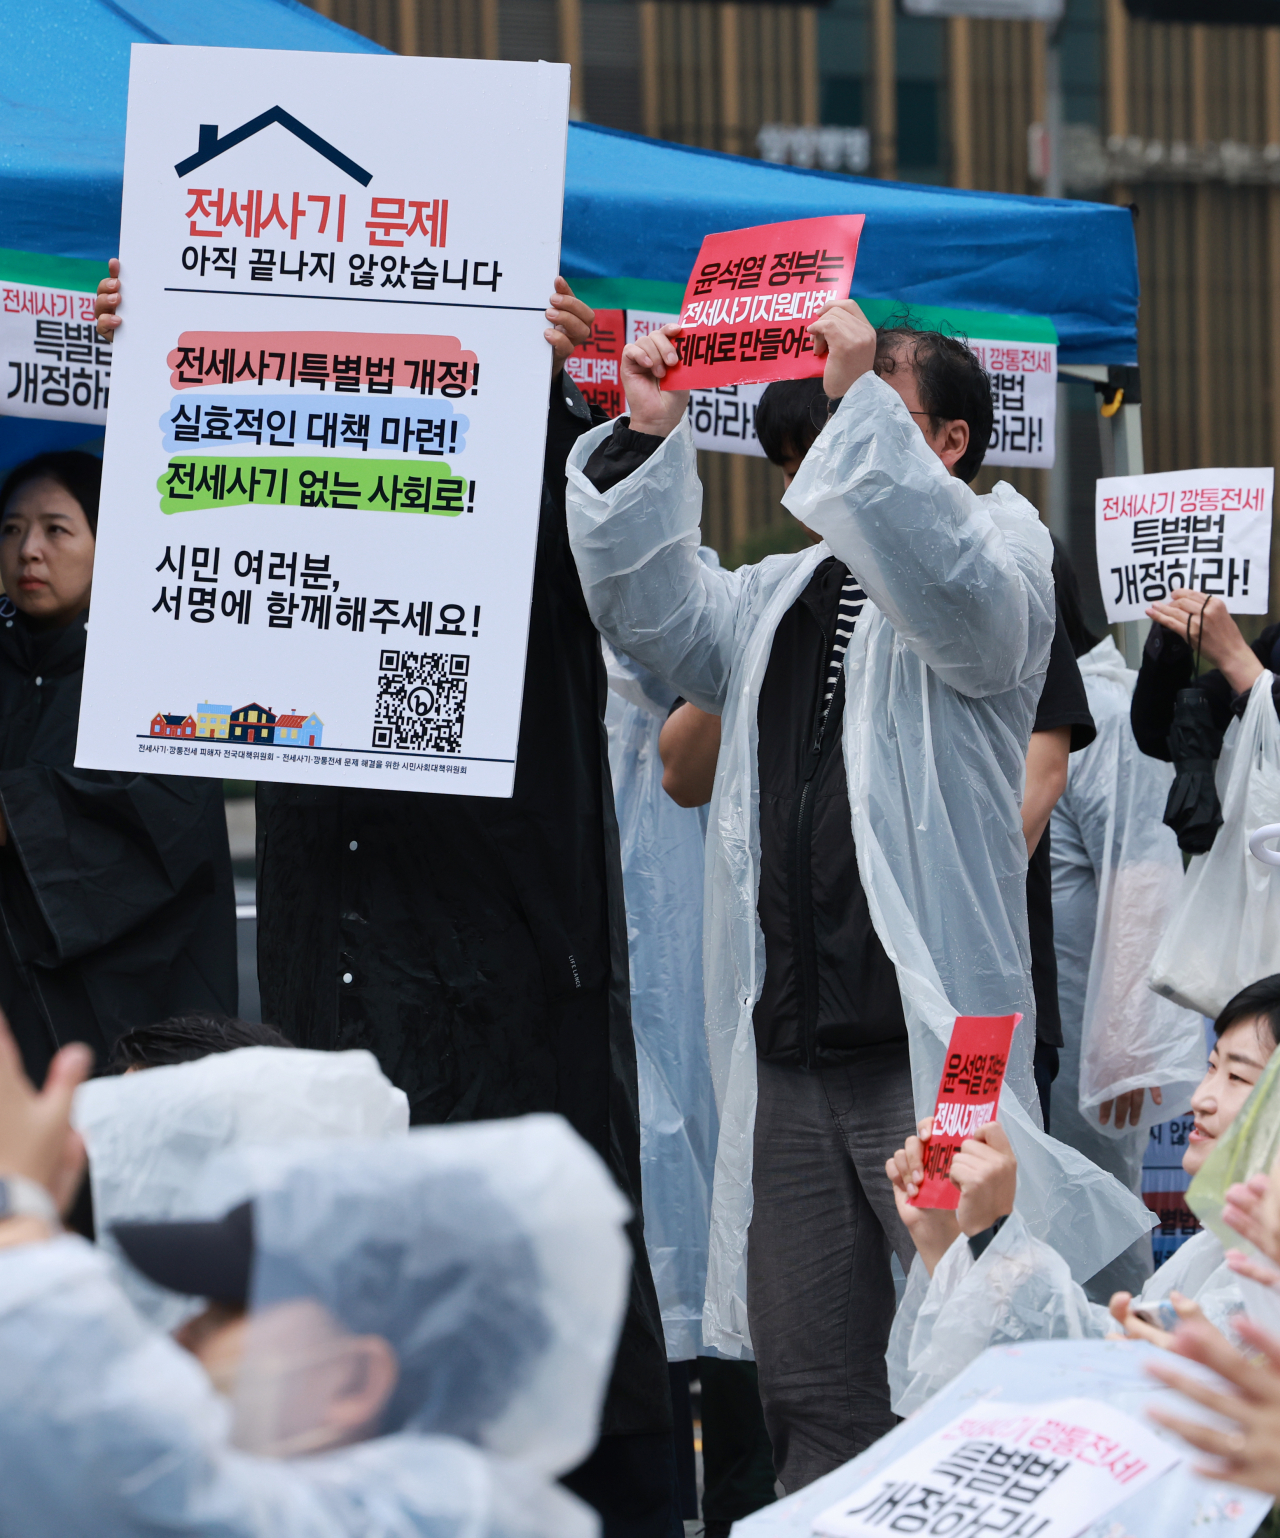 Protesters call for a revision of the Special Act on Jeonse Fraud at a rally held near Jonggak Station in central Seoul on Saturday. (Yonhap)